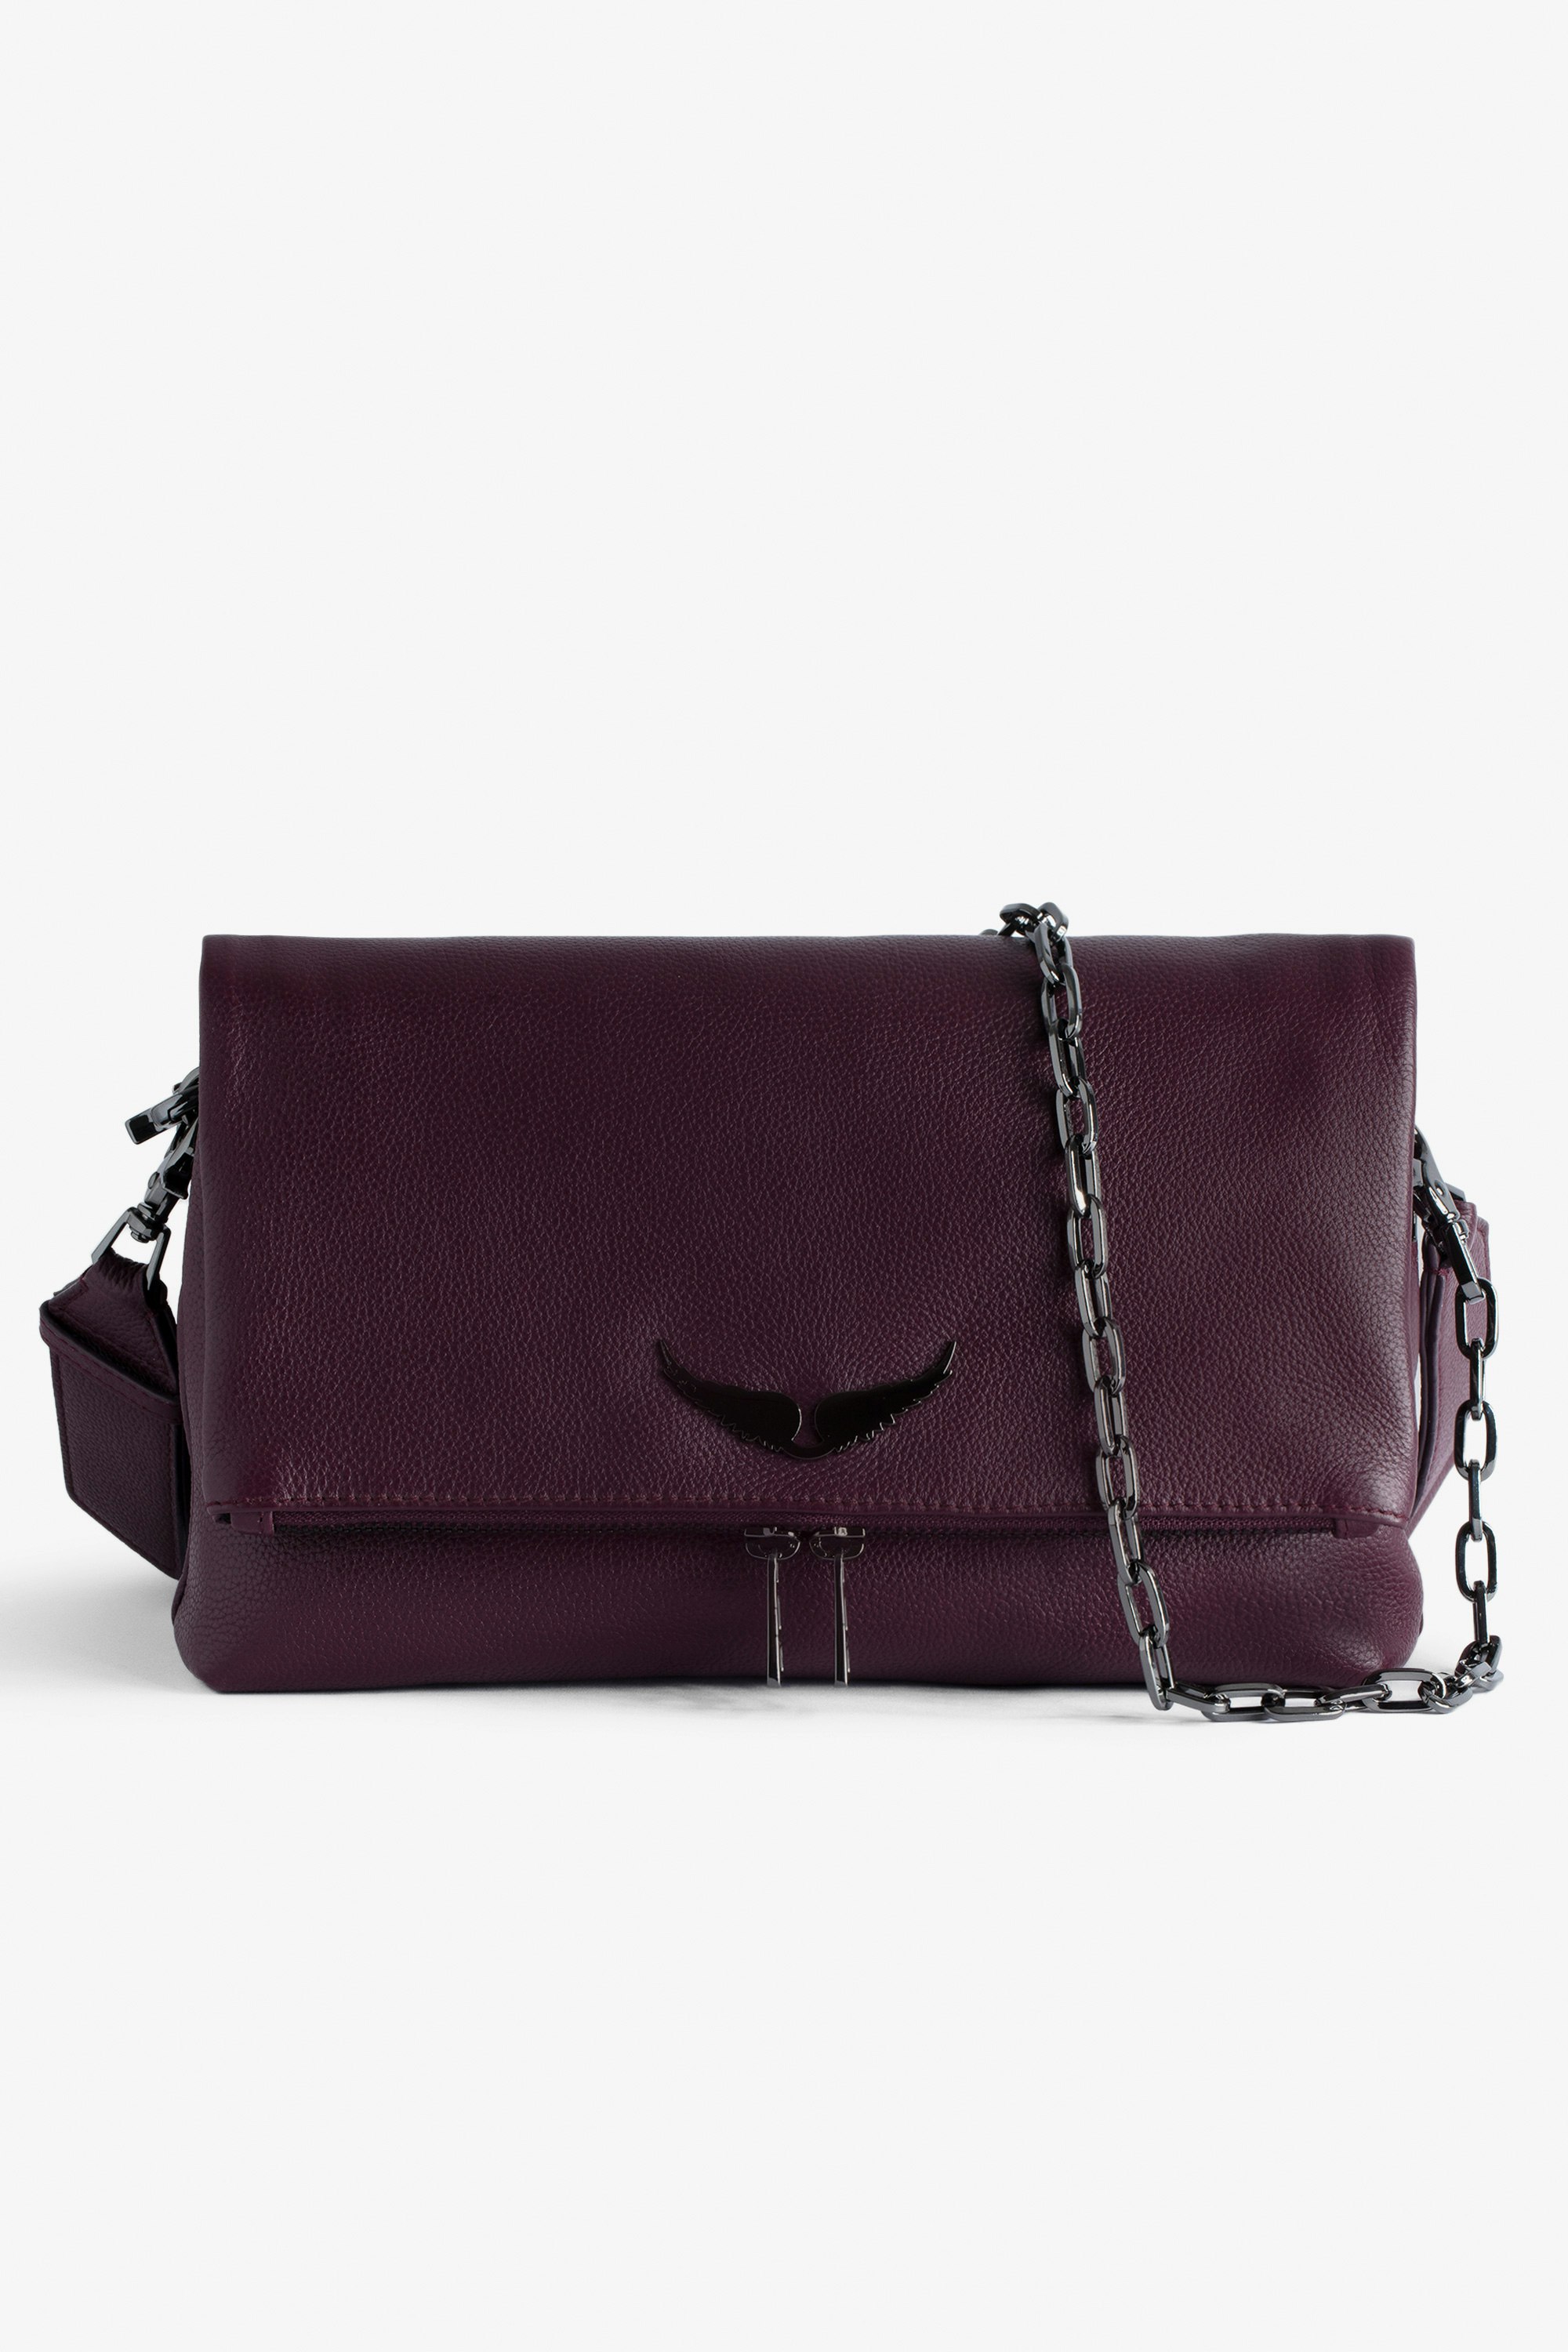 Rocky バッグ Women’s burgundy grained leather bag with shoulder strap and wings charm